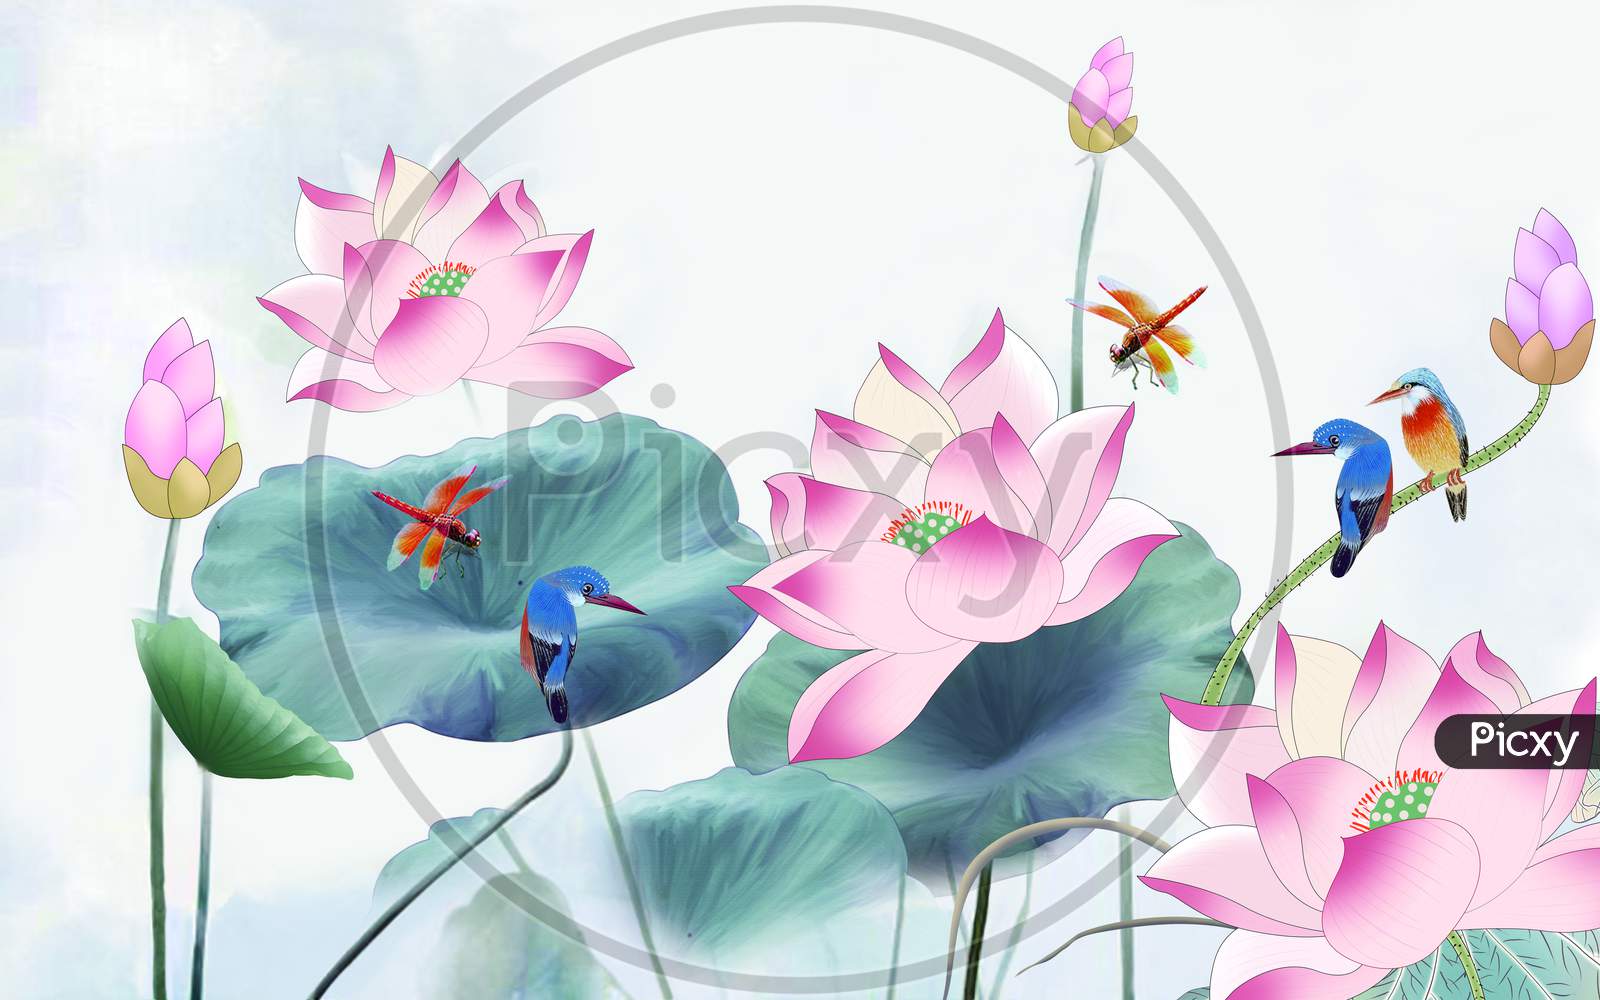 Beautiful Pink Flowers Plant With birds And Bee 3d Illustartion Wallpaper Design.